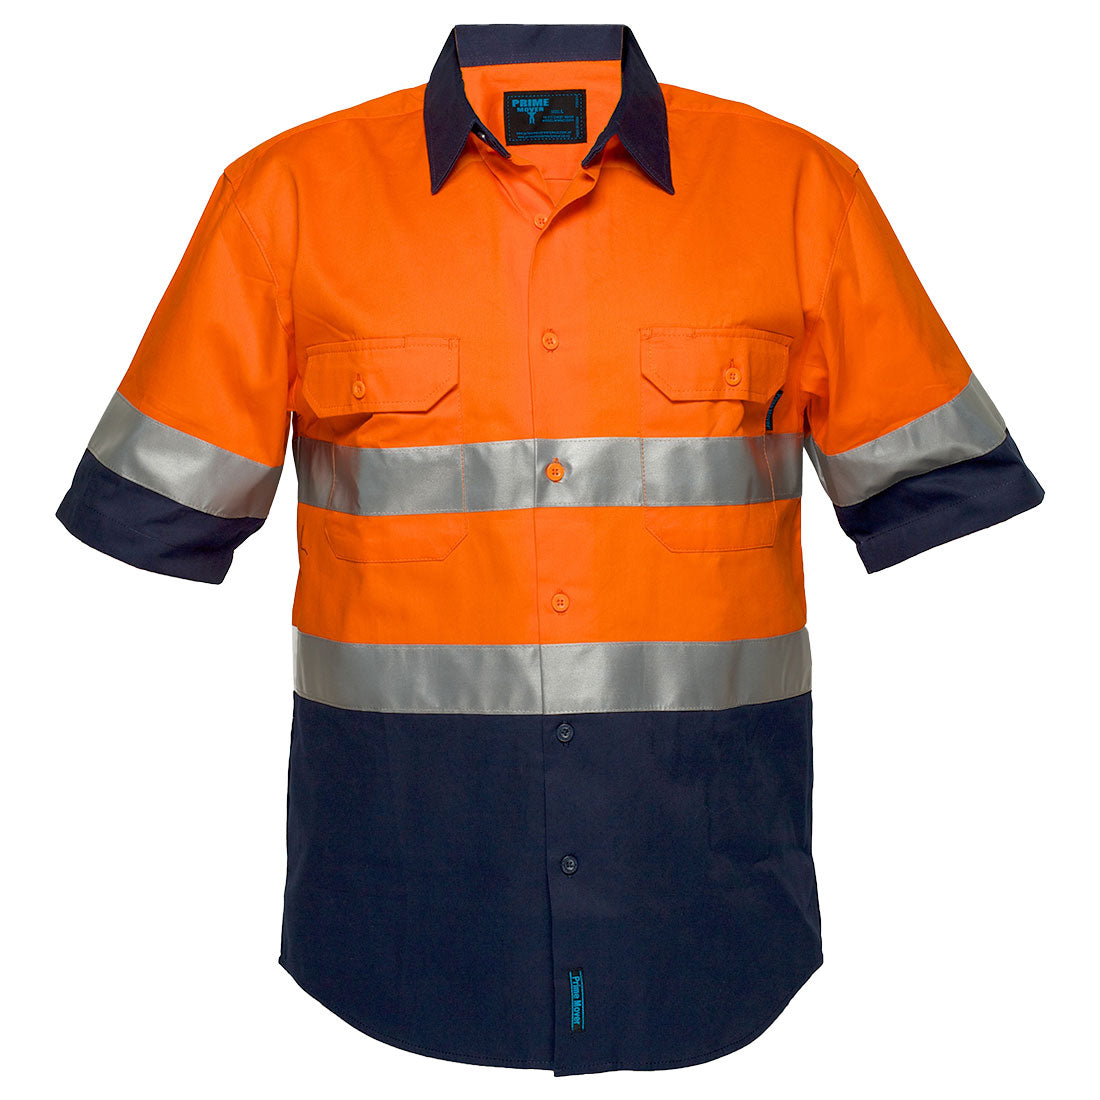 Portwest Hi-Vis Two Tone Regular Weight Short Sleeve Shirt with Tape (MA102)